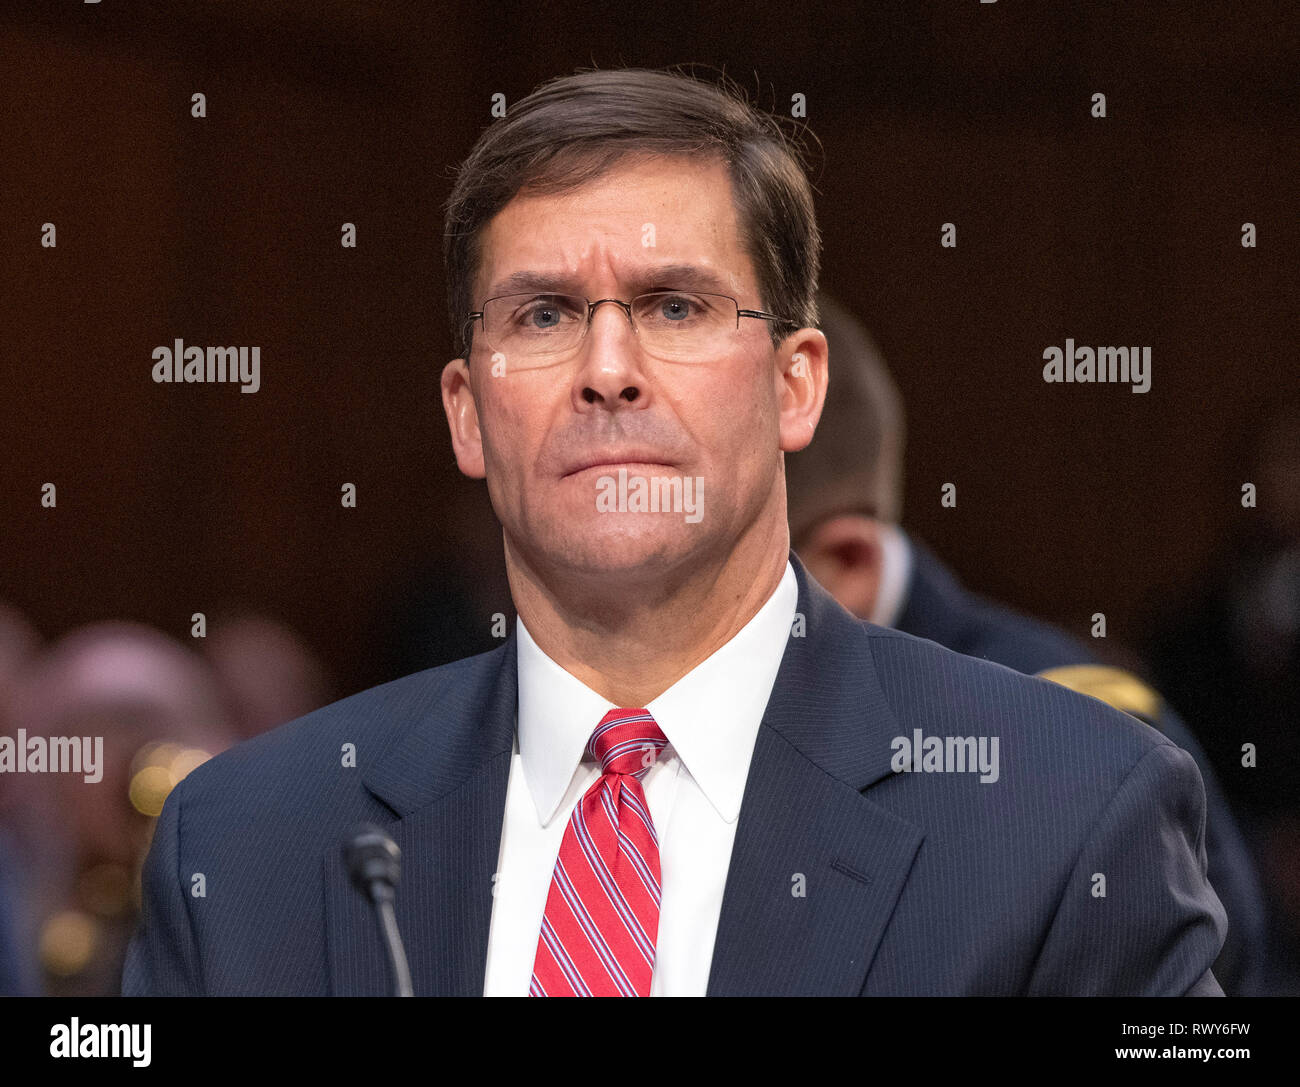 United States Secretary of the Army Dr. Mark T. Esper testifies before the US Senate Committee on Armed Services during a hearing on 'Chain of Command's Accountability to Provide Safe Military Housing and Other Building Infrastructure to Service members and Their Families' on Capitol Hill in Washington, DC on Thursday, March 7, 2019. Credit: Ron Sachs/CNP/MediaPunch Stock Photo